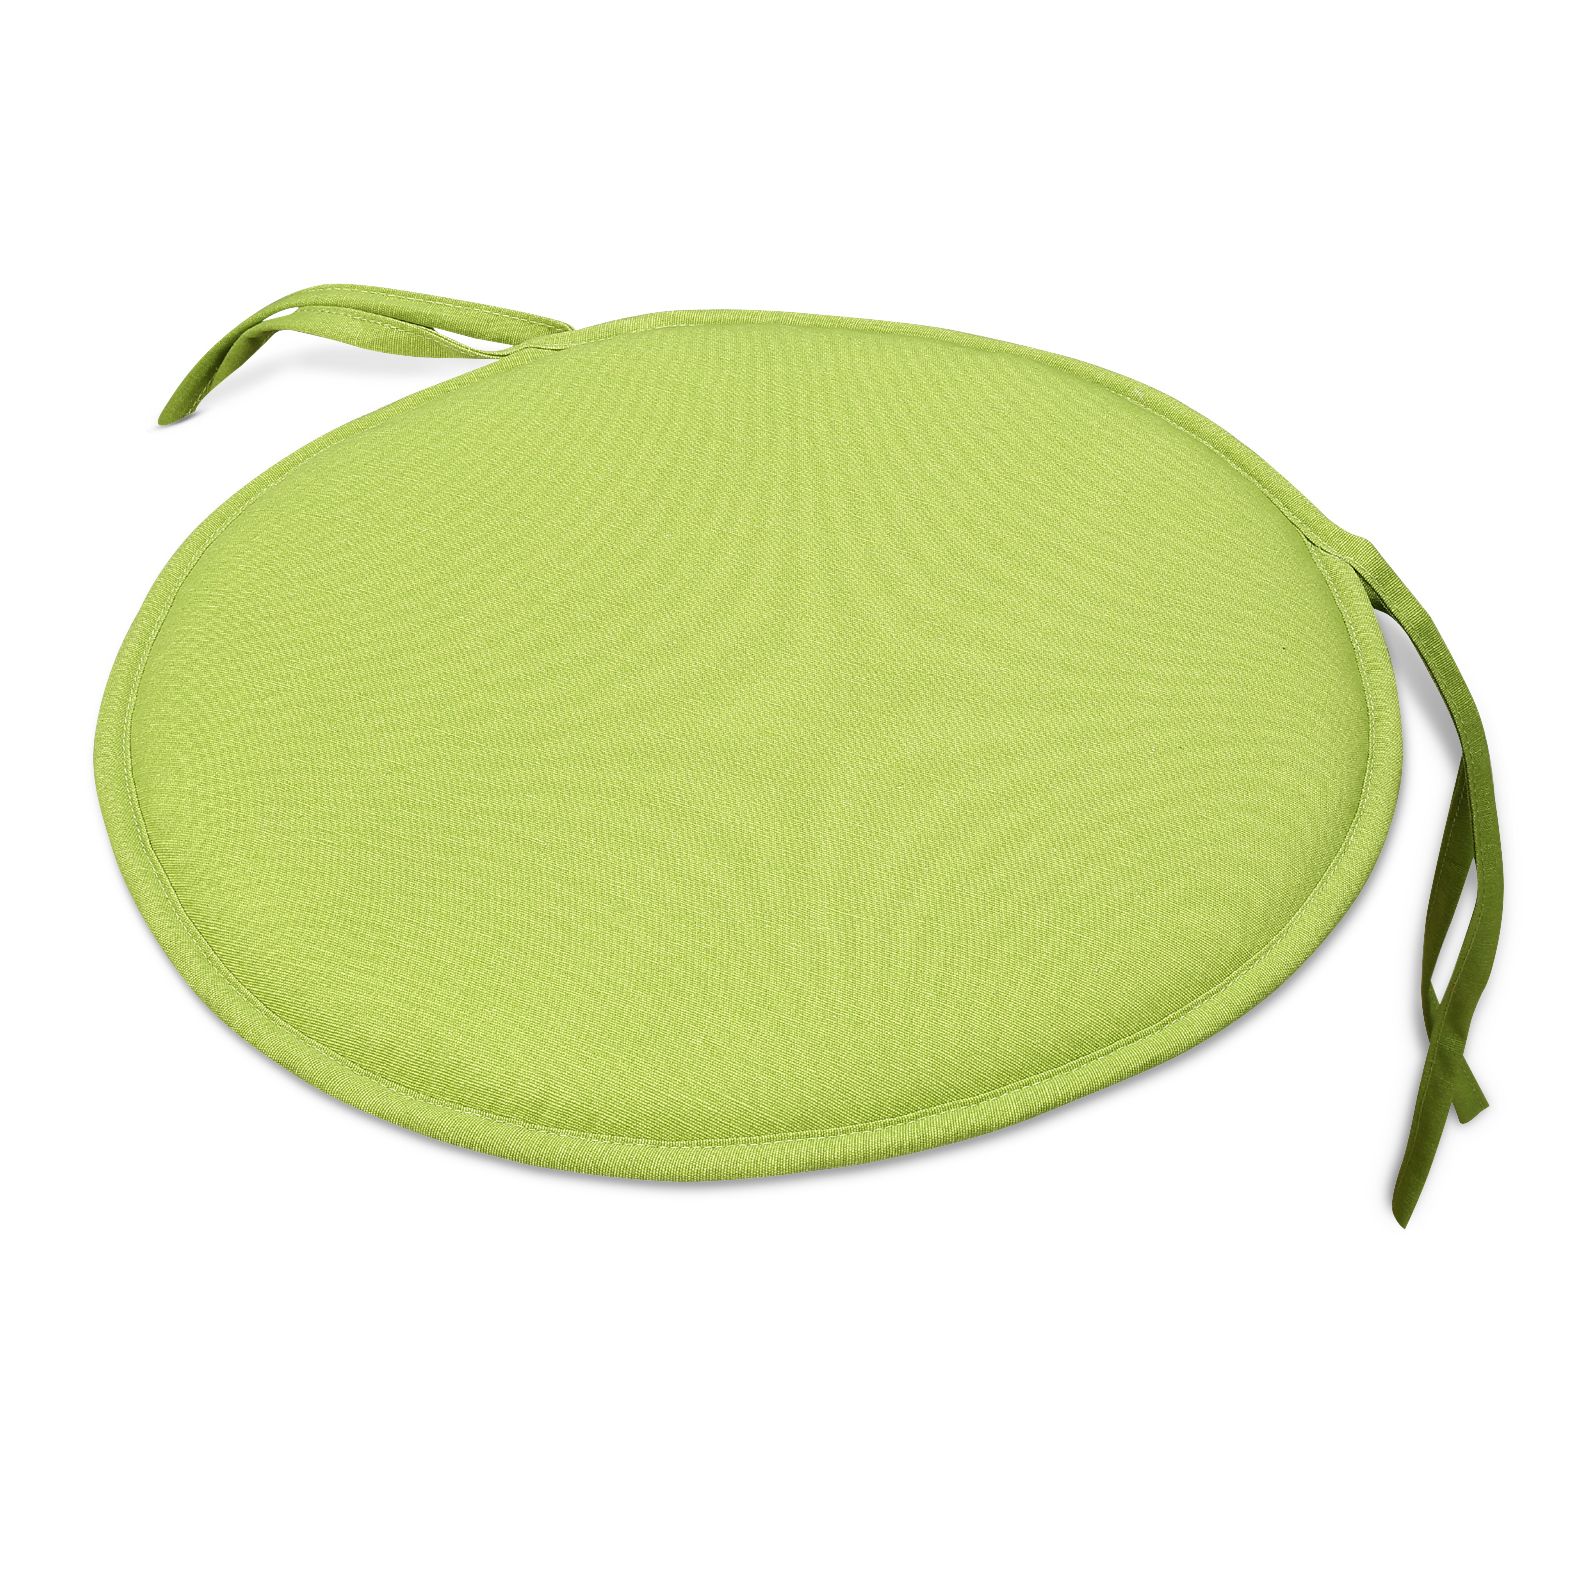 Cocos Laitue green Round Seat pad